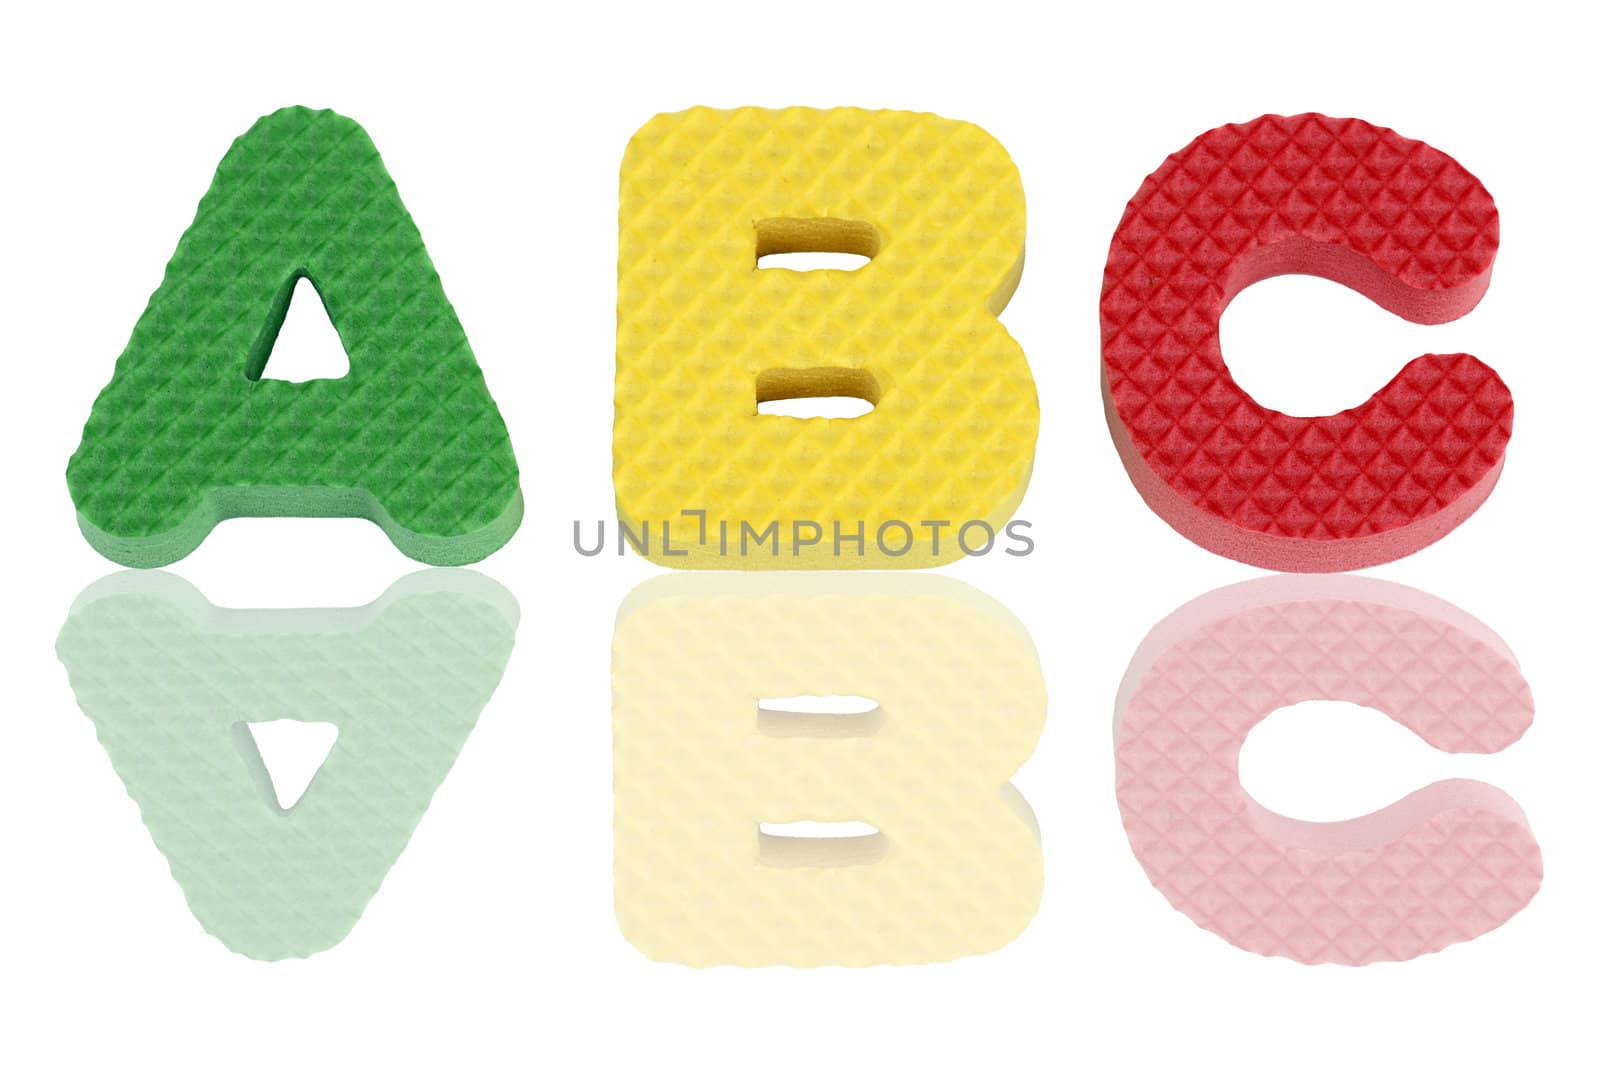 Fun colorful A B C alphabet letters in green, yellow and red textured foam with reflections.